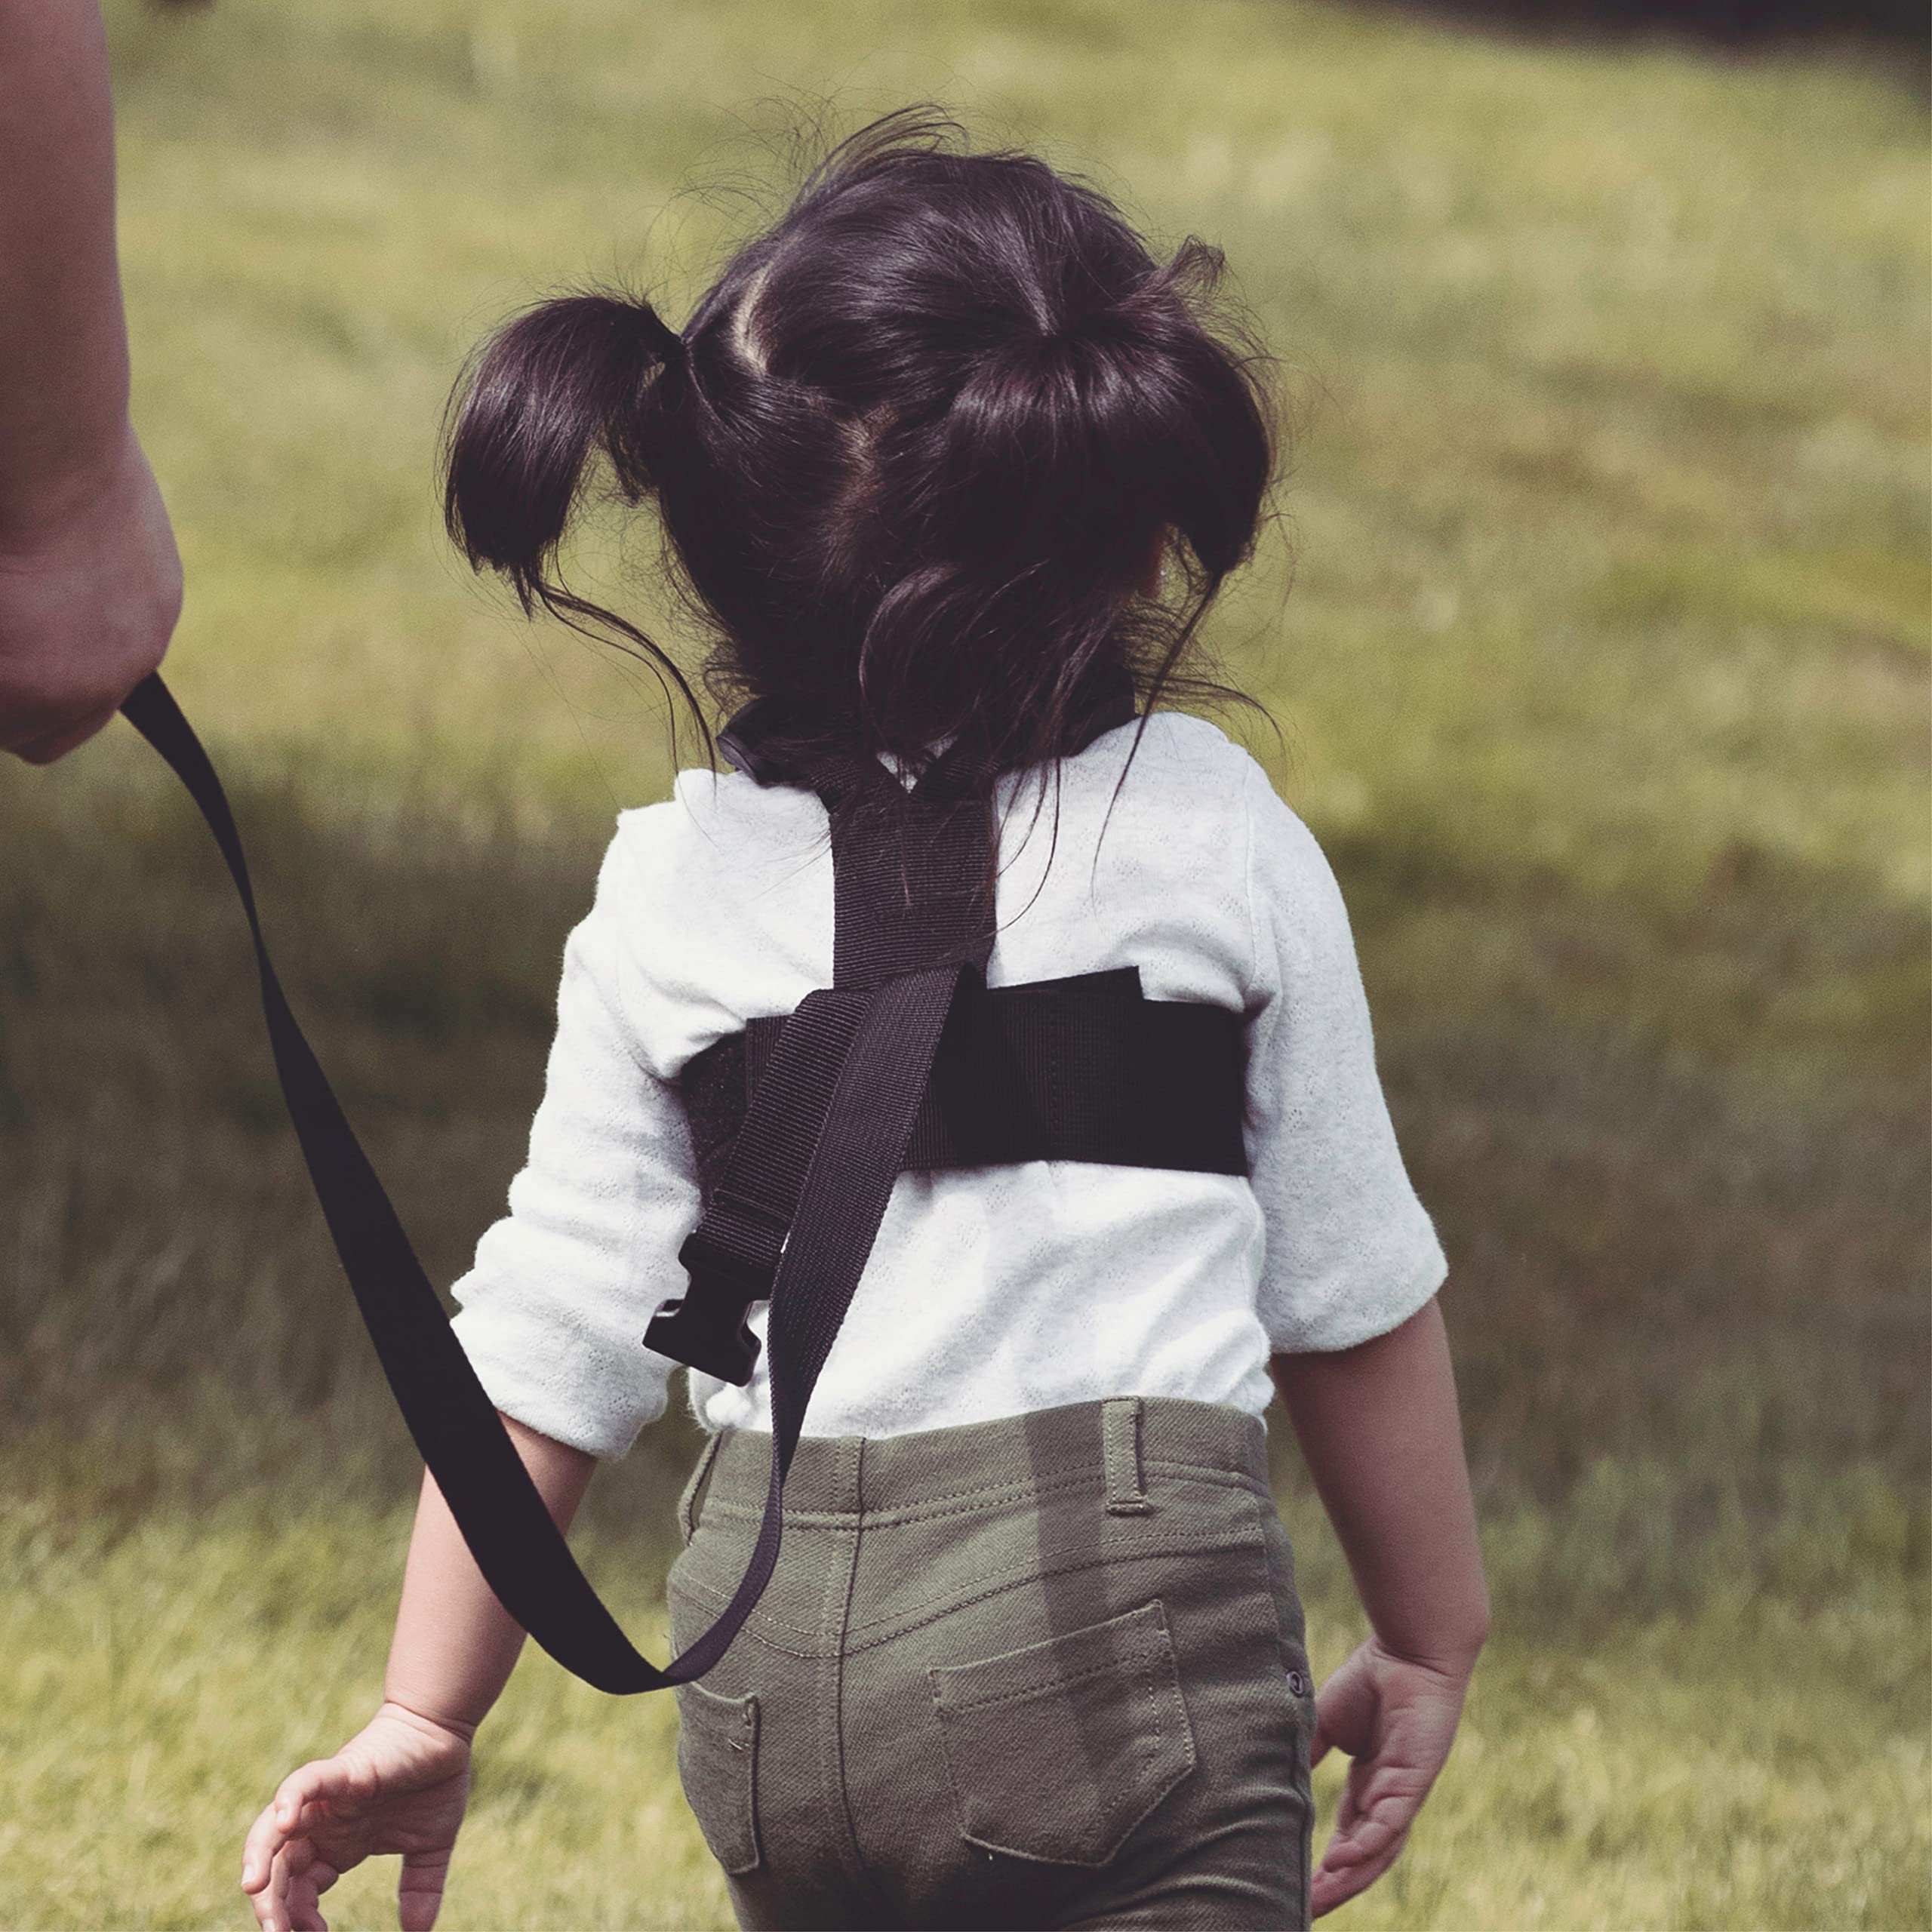 Diono Sure Steps Toddler Leash & Harness for Child Safety, with Shoulder Straps for Child Comfort